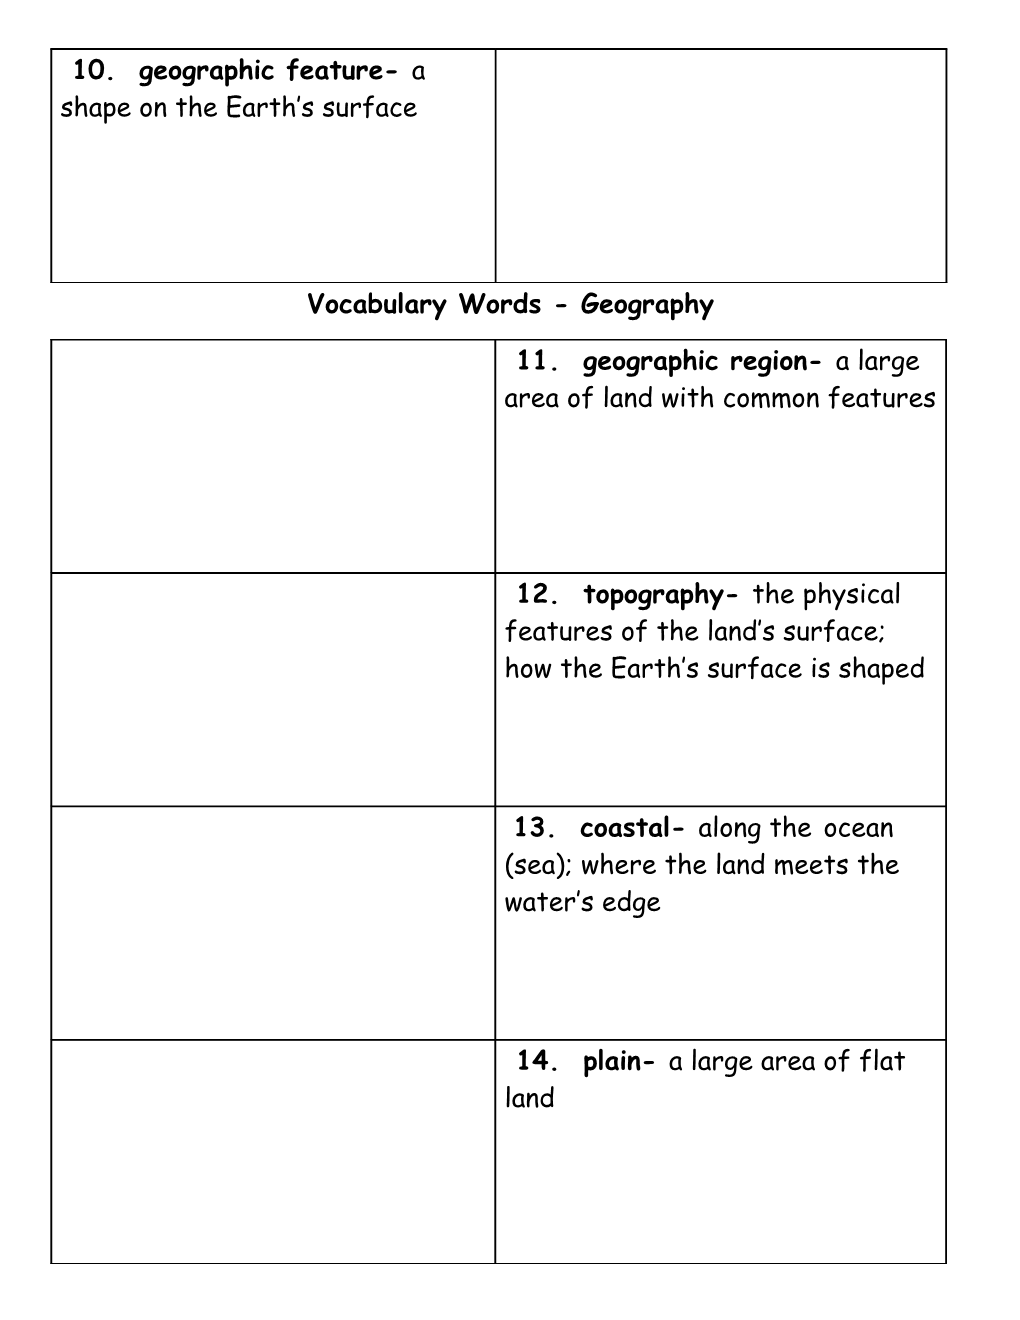 Vocabulary Words - Geography